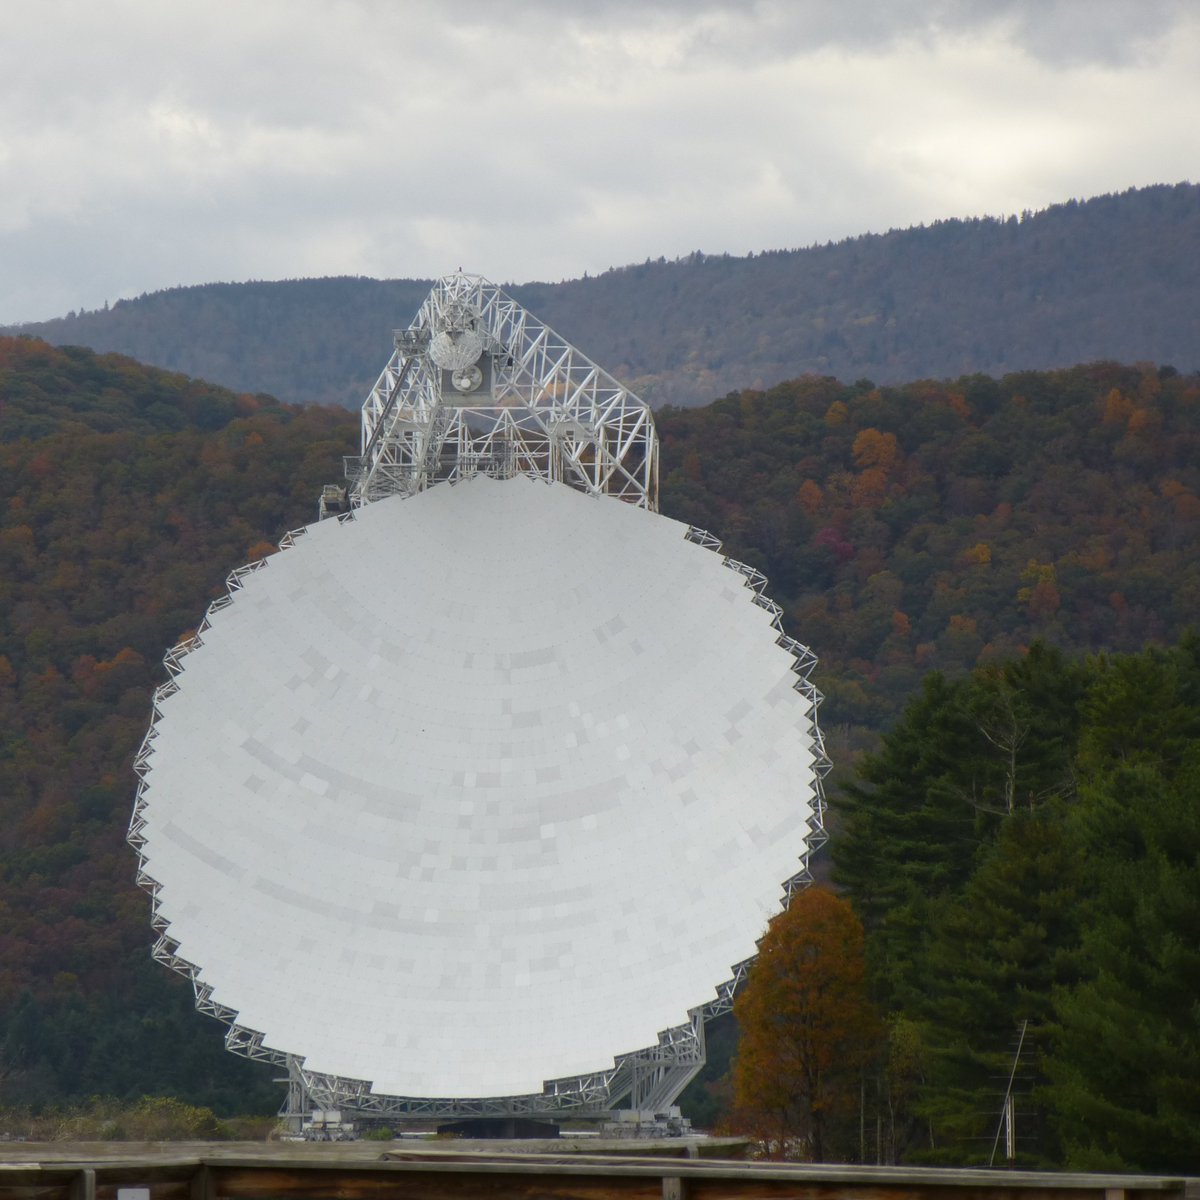 The GBT is the world's largest fully-steerable radio telescope. It is 485 feet tall and weighs 16 million pounds.1/